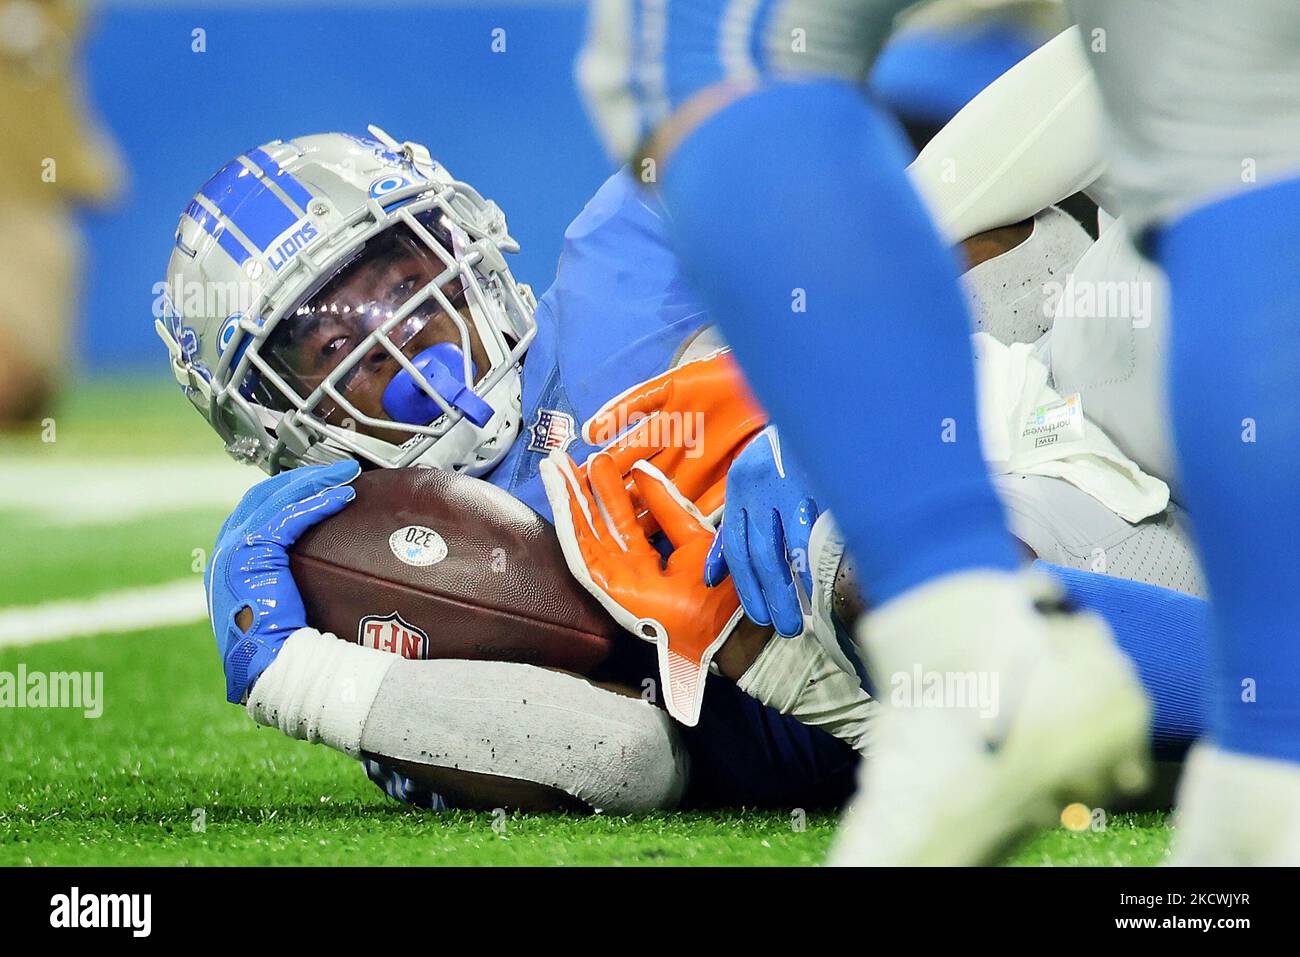 Detroit Lions running back Jamaal Williams (30) is tackled during an NFL football game between the Detroit Lions and the Chicago Bears in Detroit, Michigan USA, on Thursday, November 25, 2021. (Photo by Amy Lemus/NurPhoto) Stock Photo